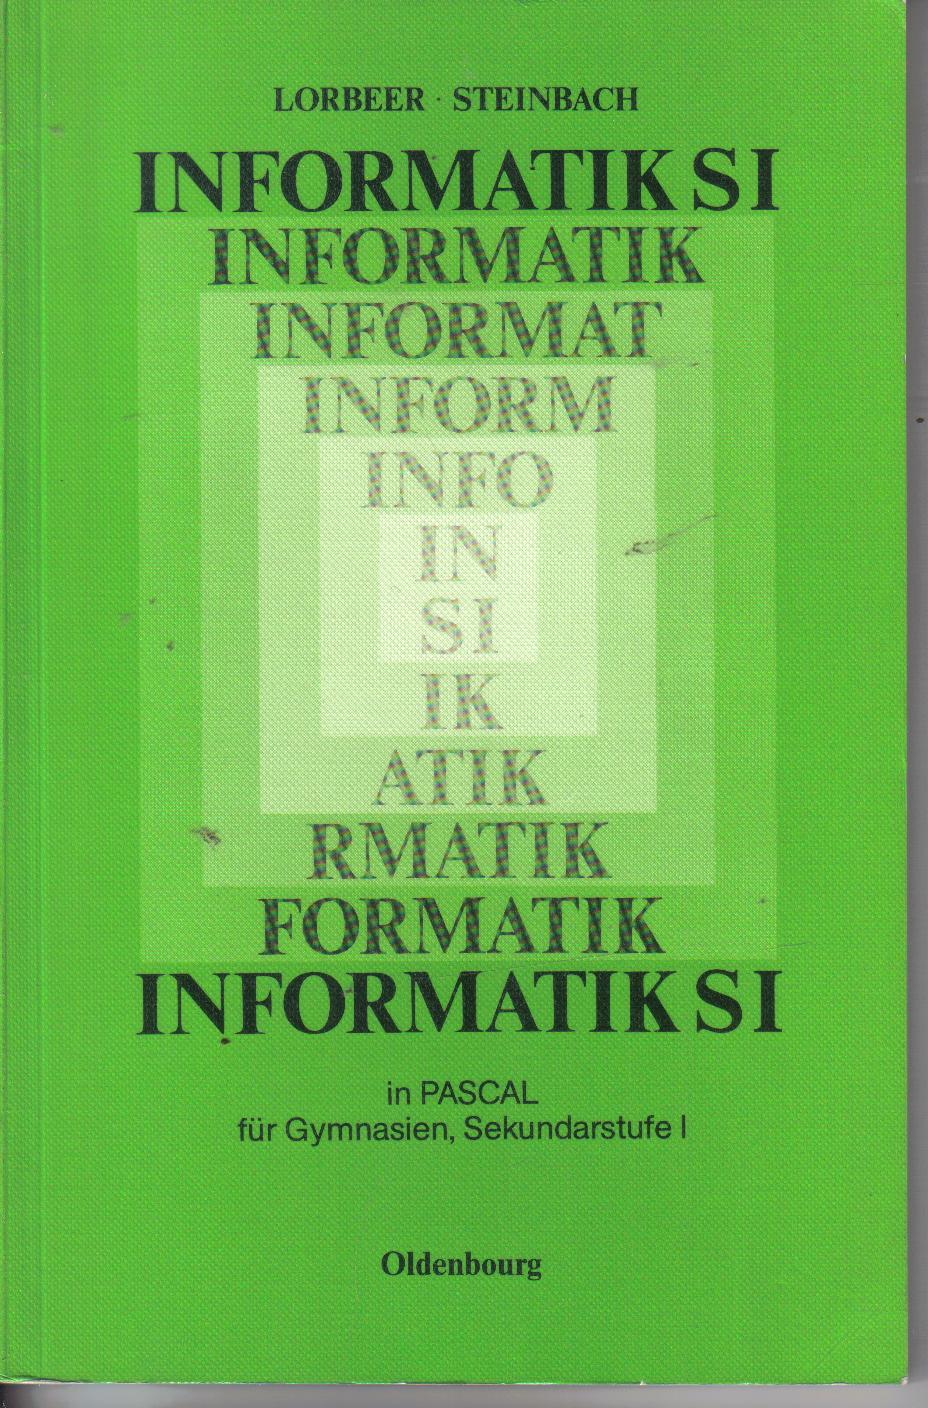 Informatik SI in PASCALLorbeer/Steinbach